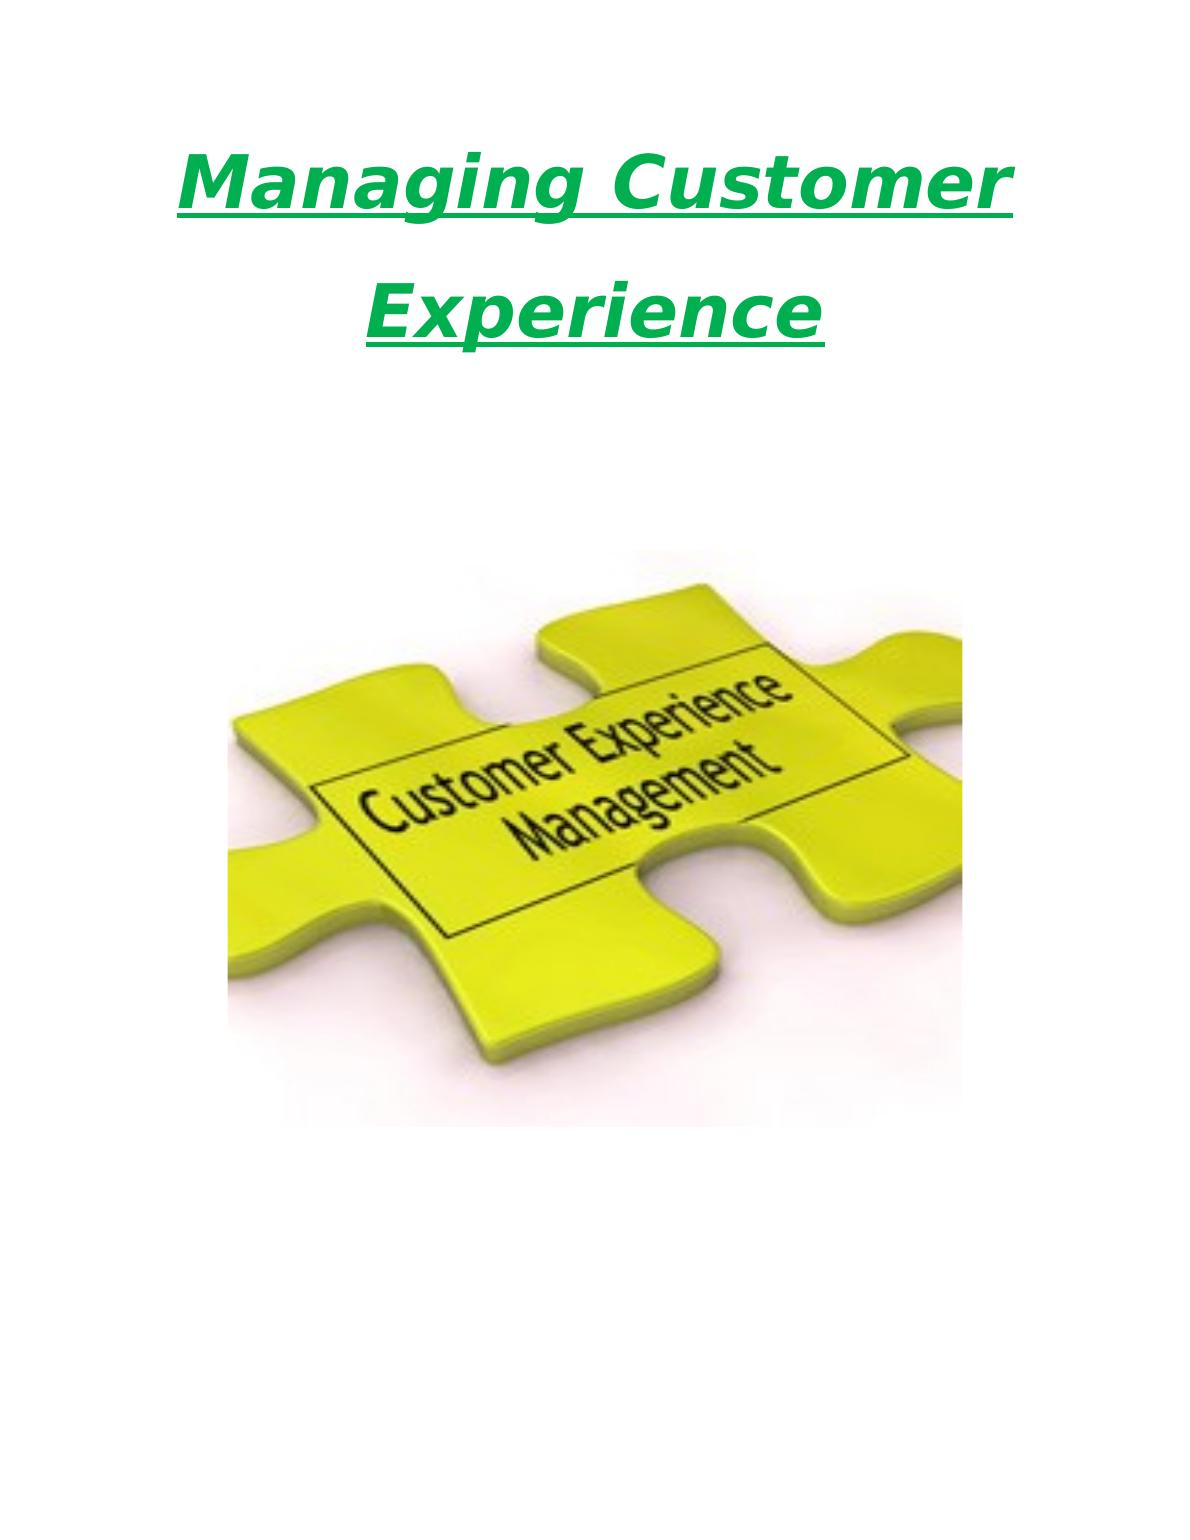 Managing Customer Experience in Travel and Tourism Management Coursework_1